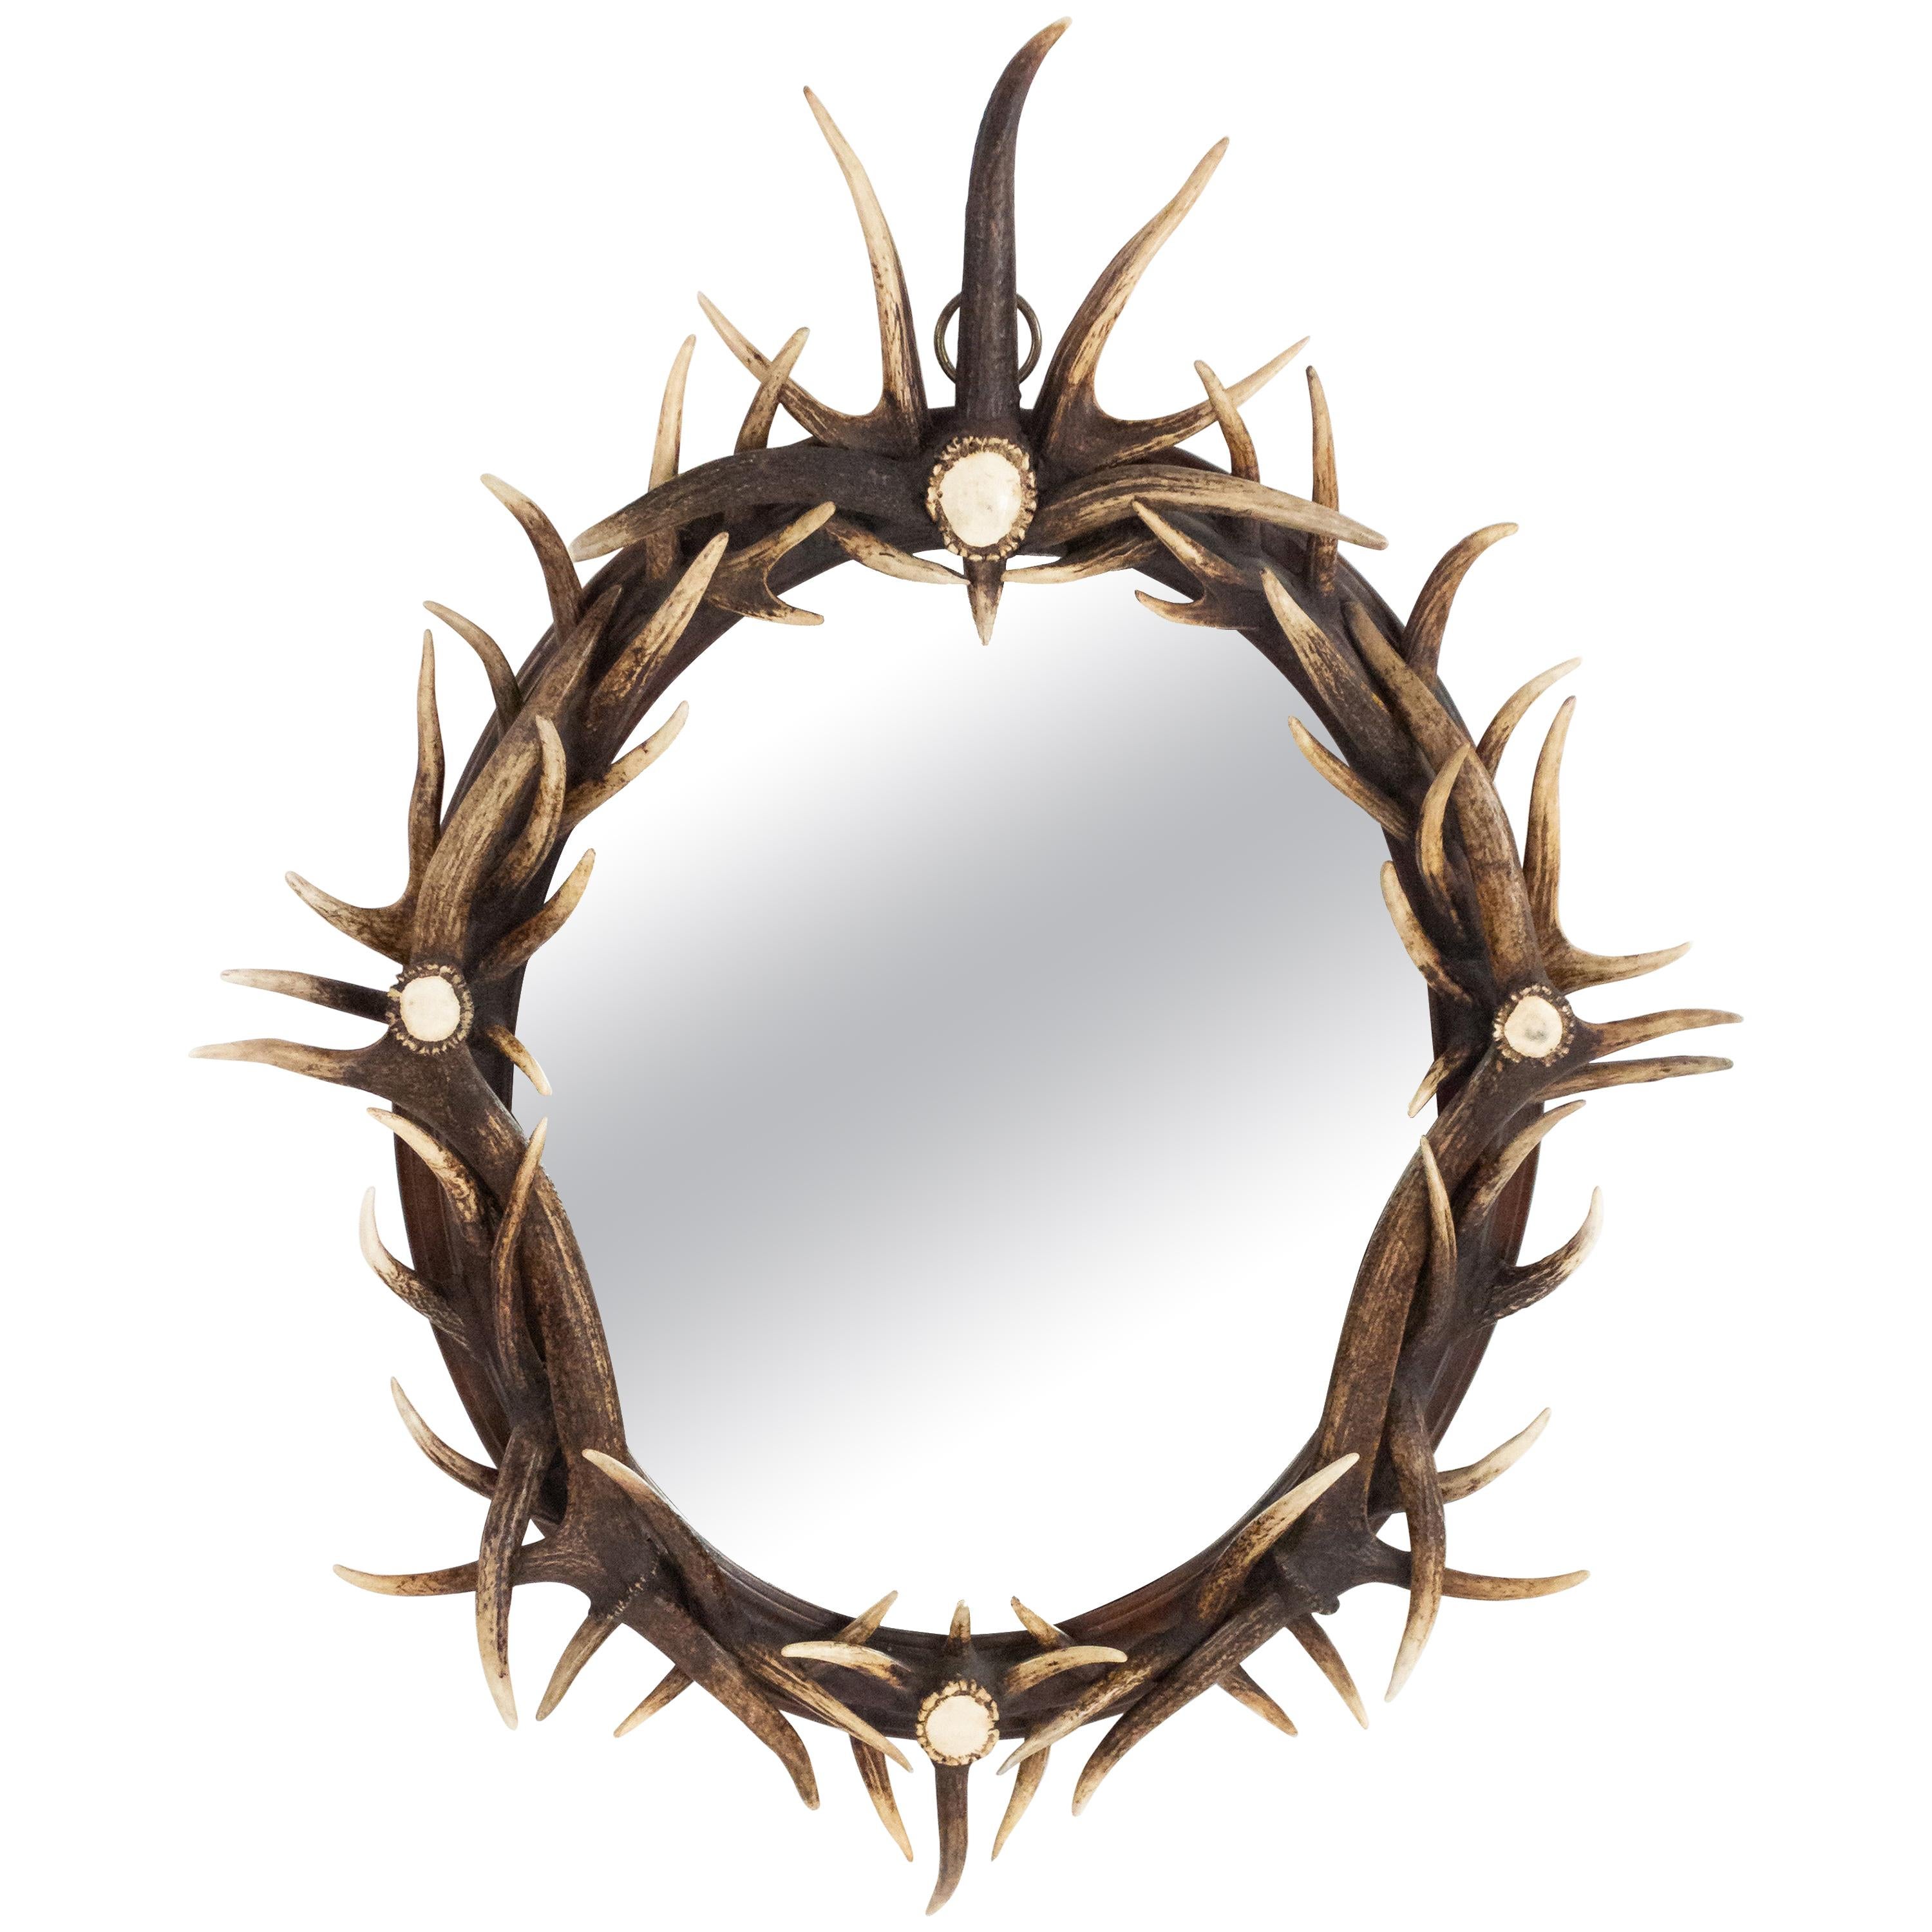 Rustic Oval Antler Wall Mirror